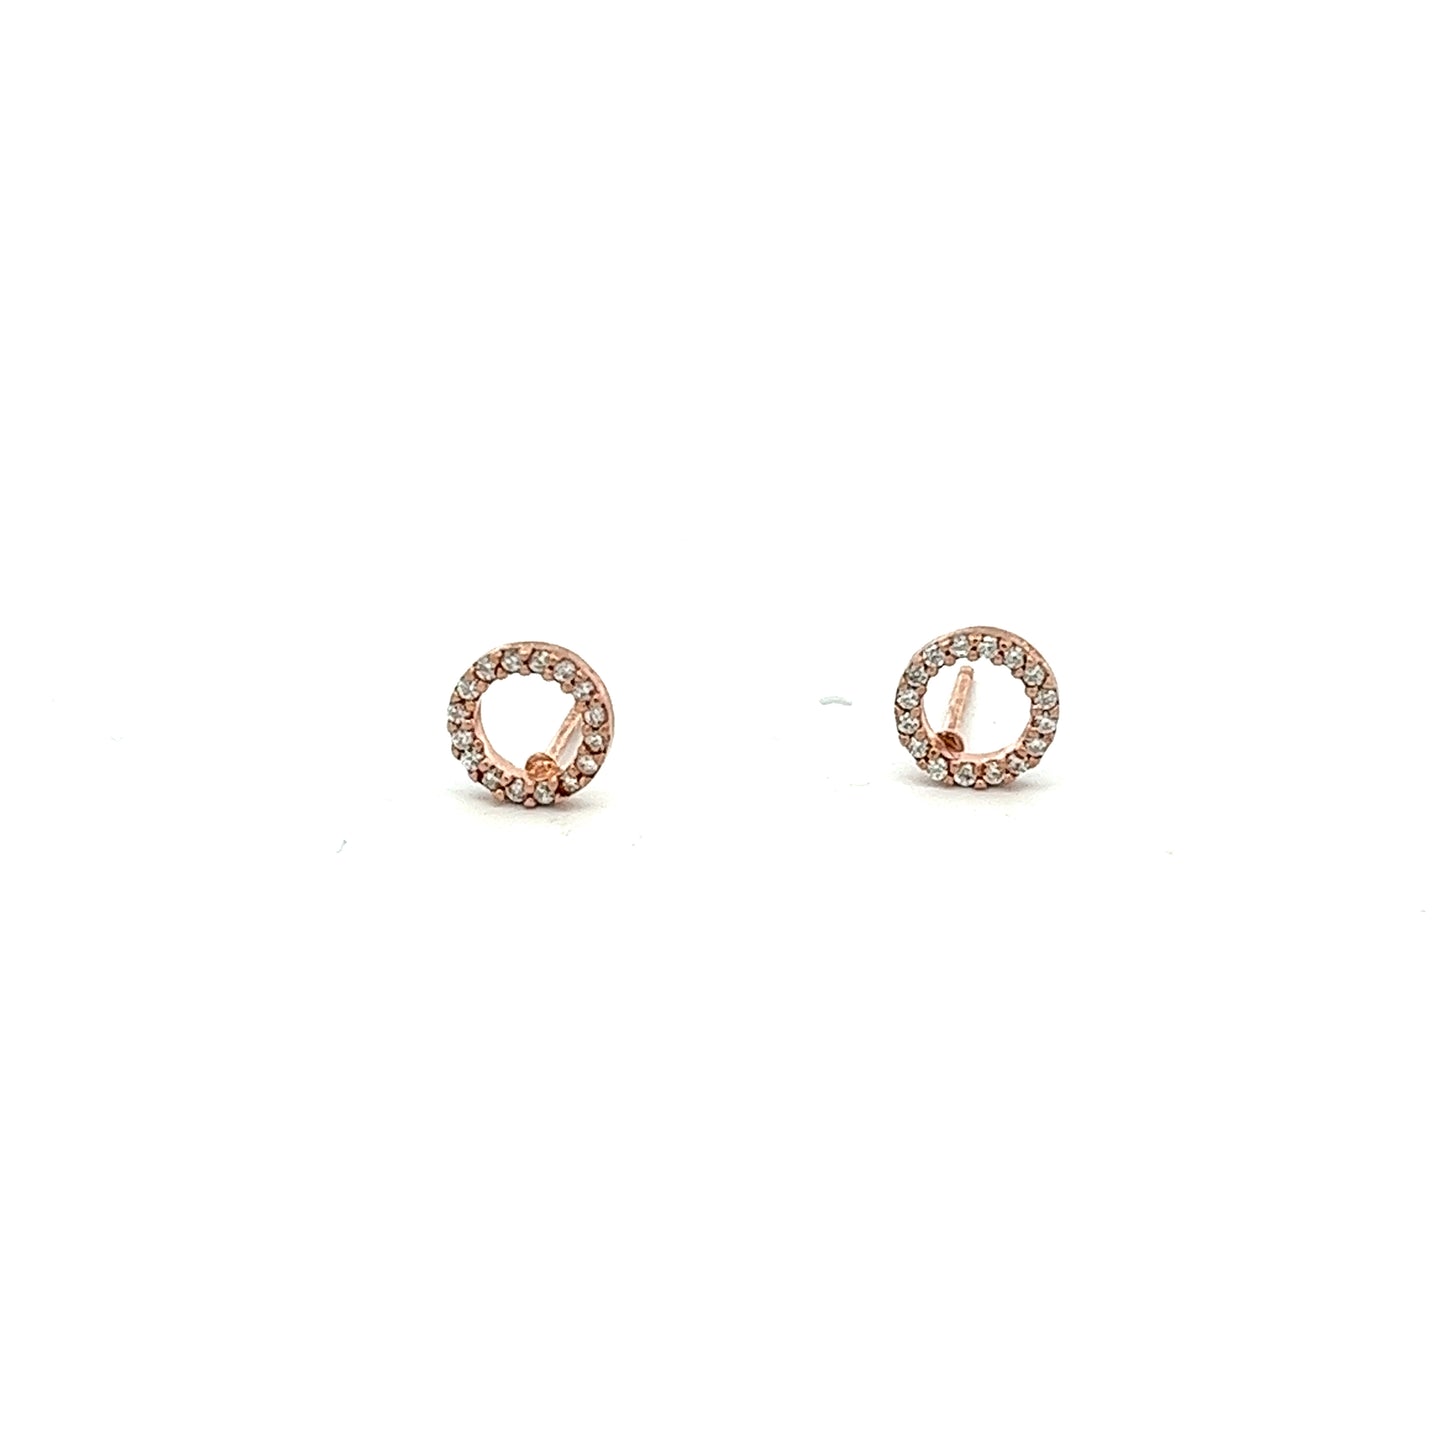 Big All Around The World Earrings in Rose Gold